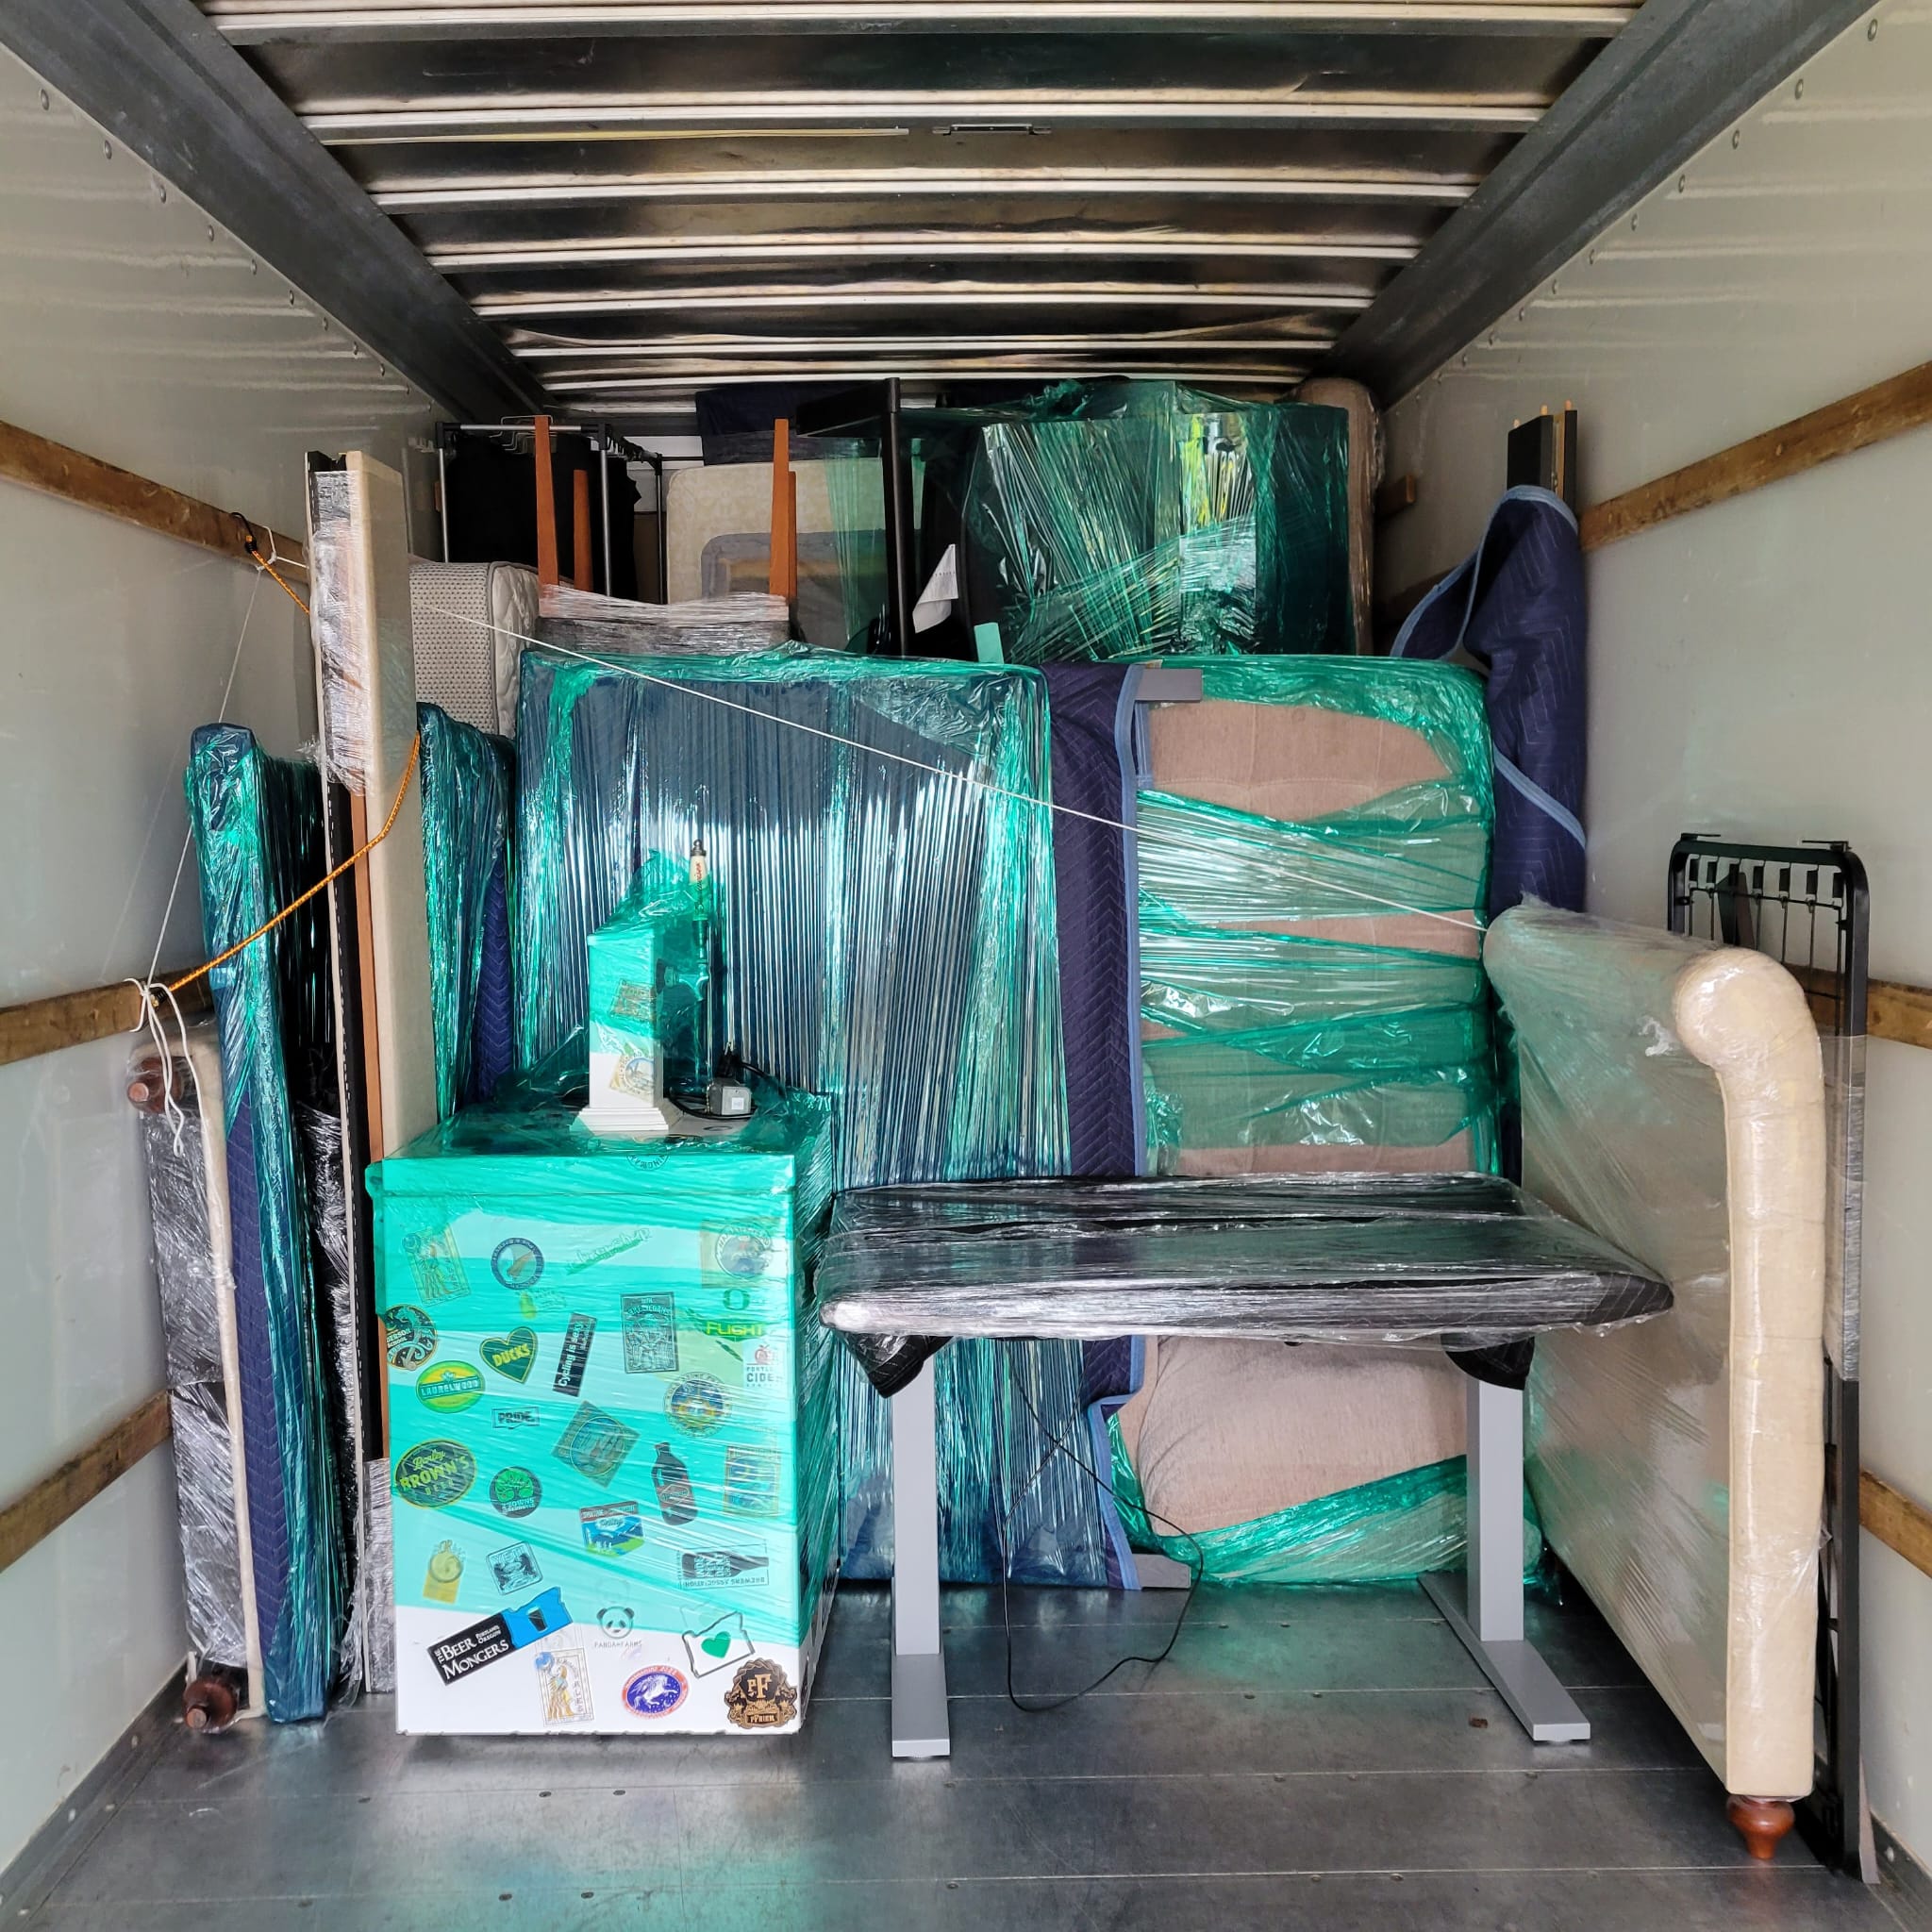 Best local movers in Portland Oregon - The Smoove Movers